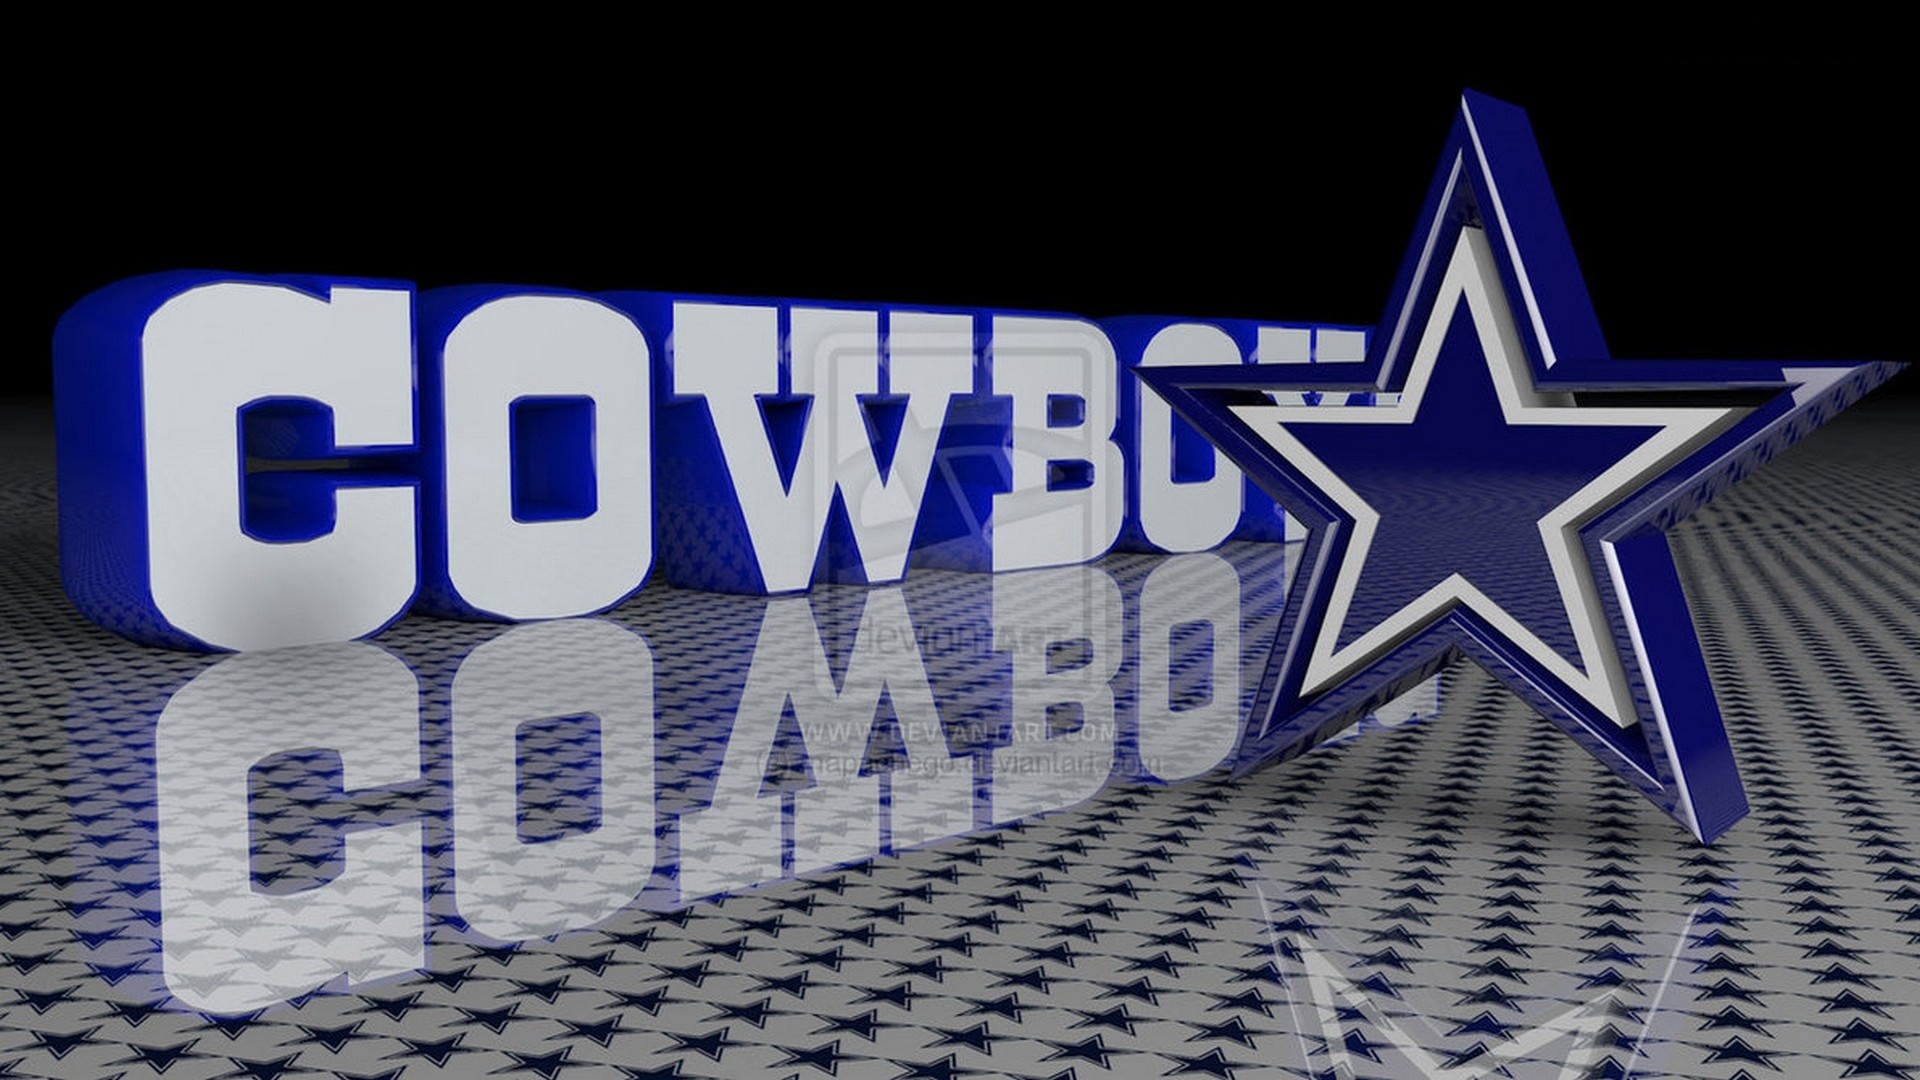 1920x1080  Dallas Cowboys Backgrounds HD - 2018 NFL Football Wallpapers